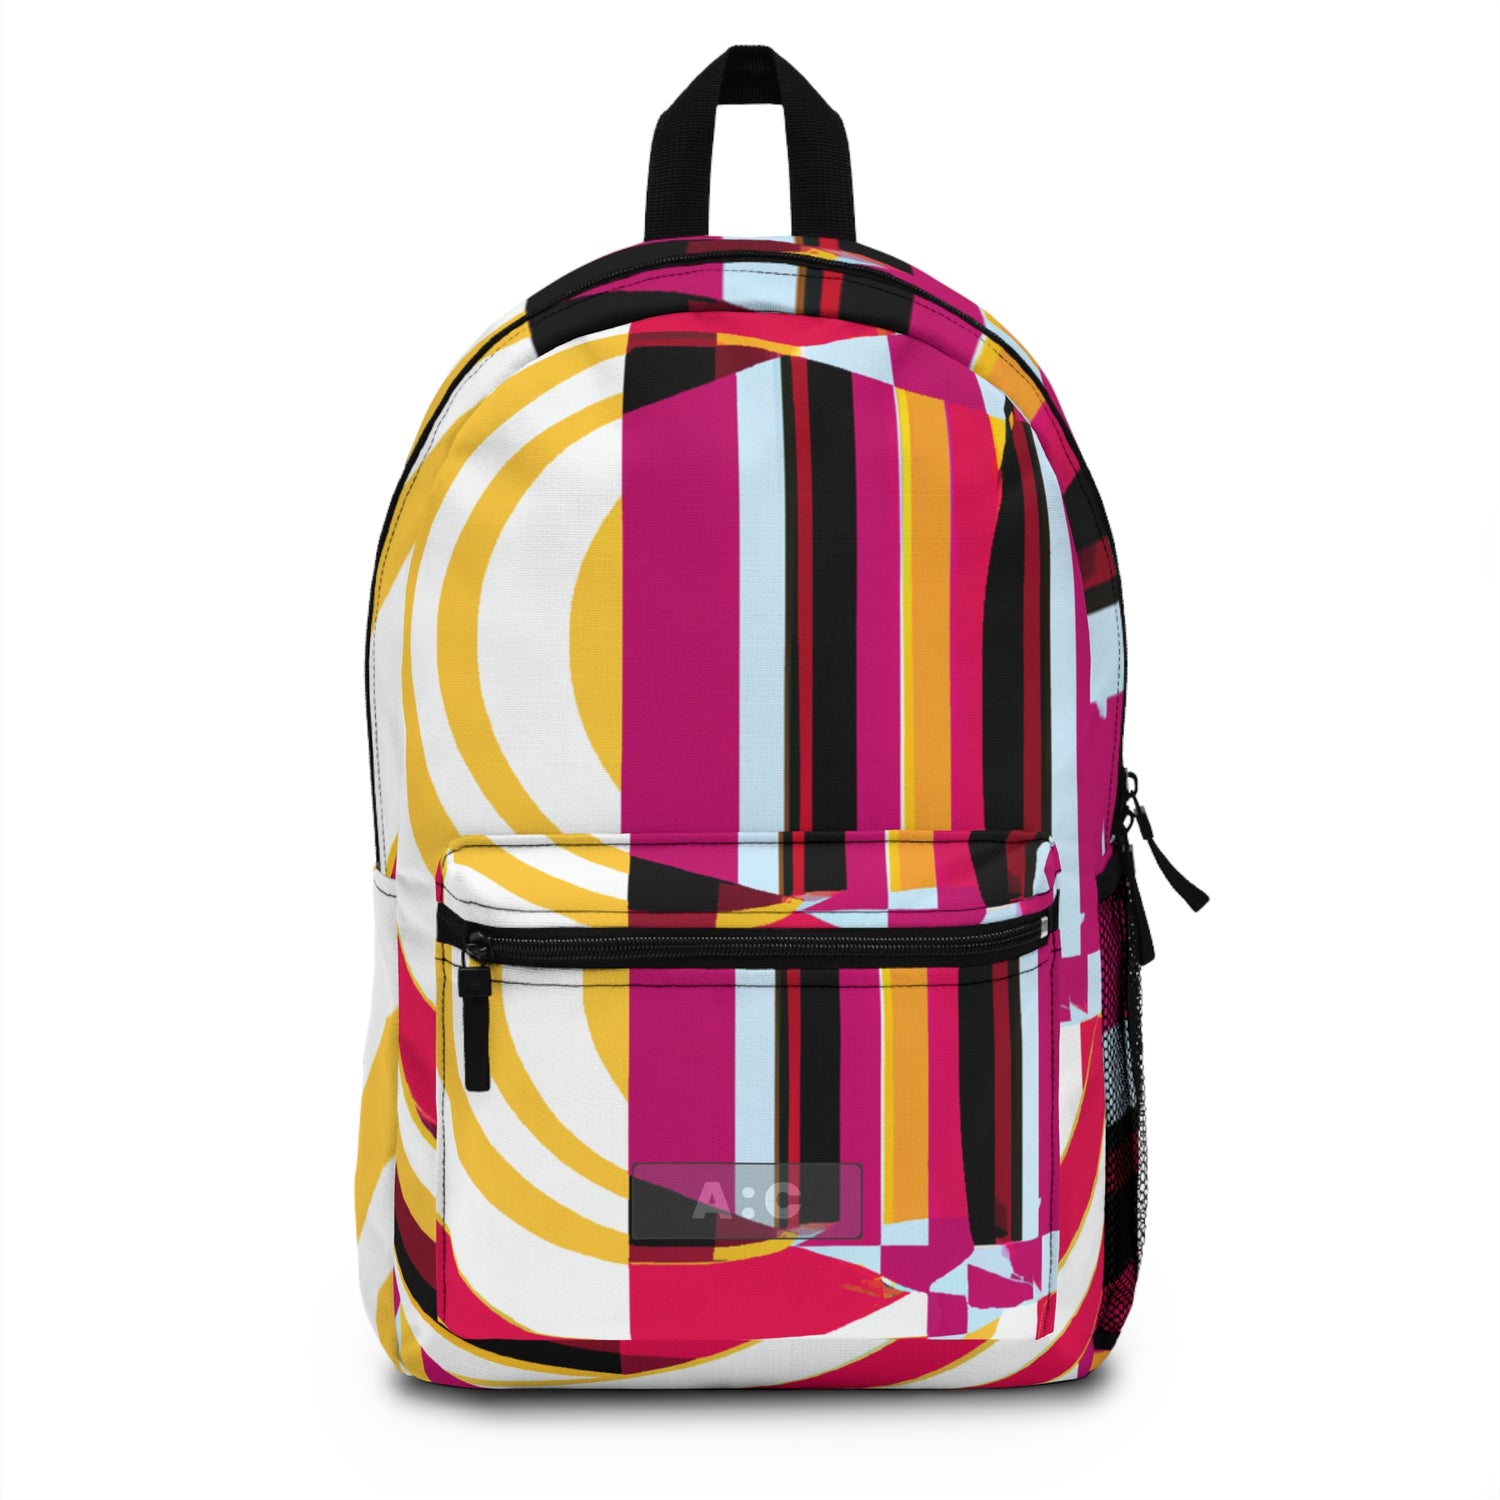 Backpacks inspired by our Artist's Designs.